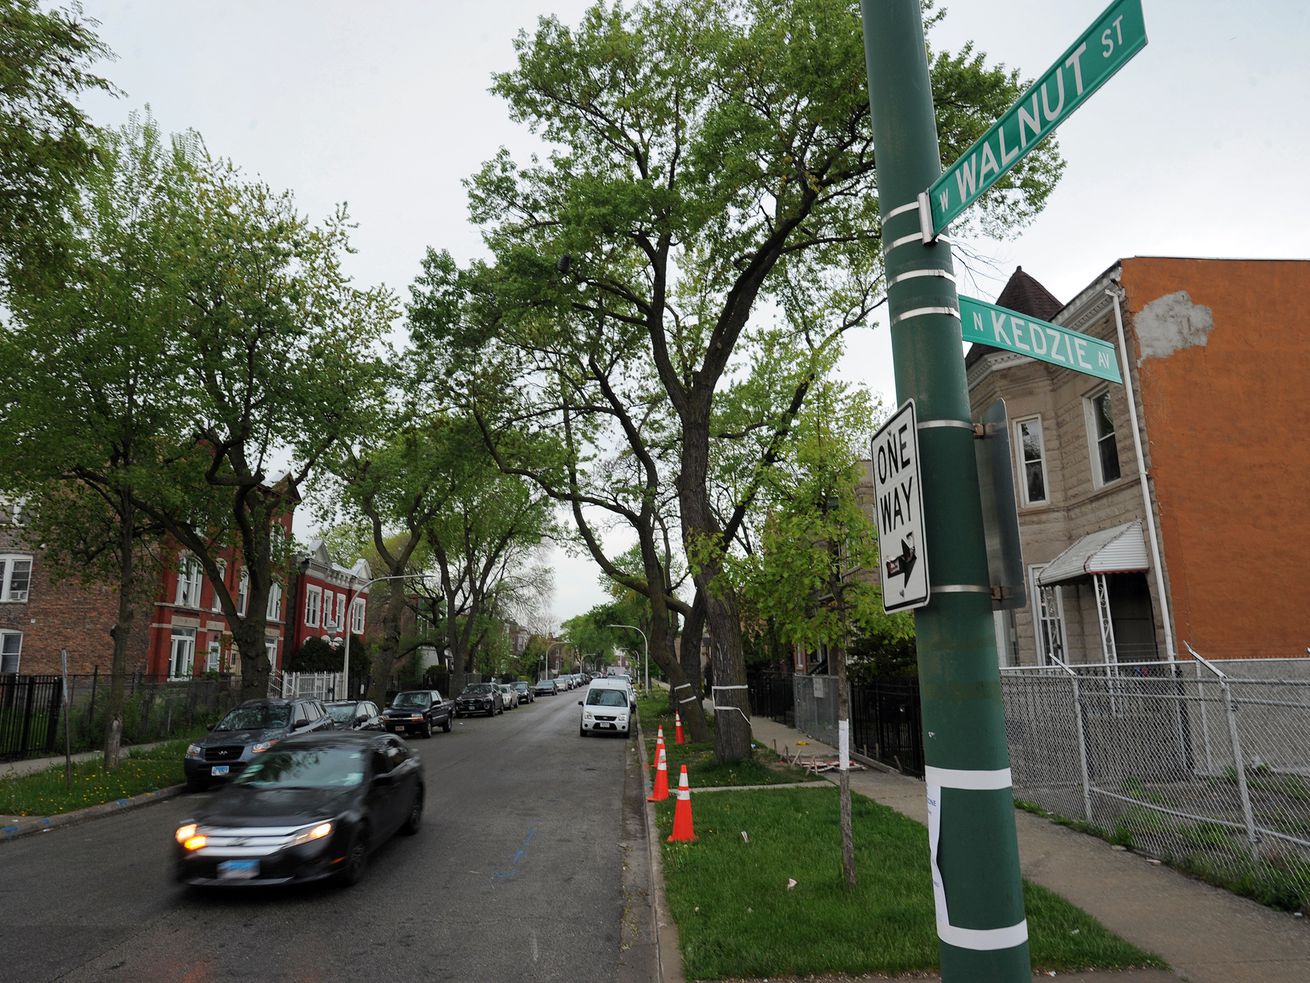 Street scene at beginning of the 3200 block of West Walnut Street in East Garfield Park, Chicago on May 16, 2019. This block has some of the highest price quotes for car insurance in the city out of more than 300 tests the Sun-Times ran in its investigation of car insurance.